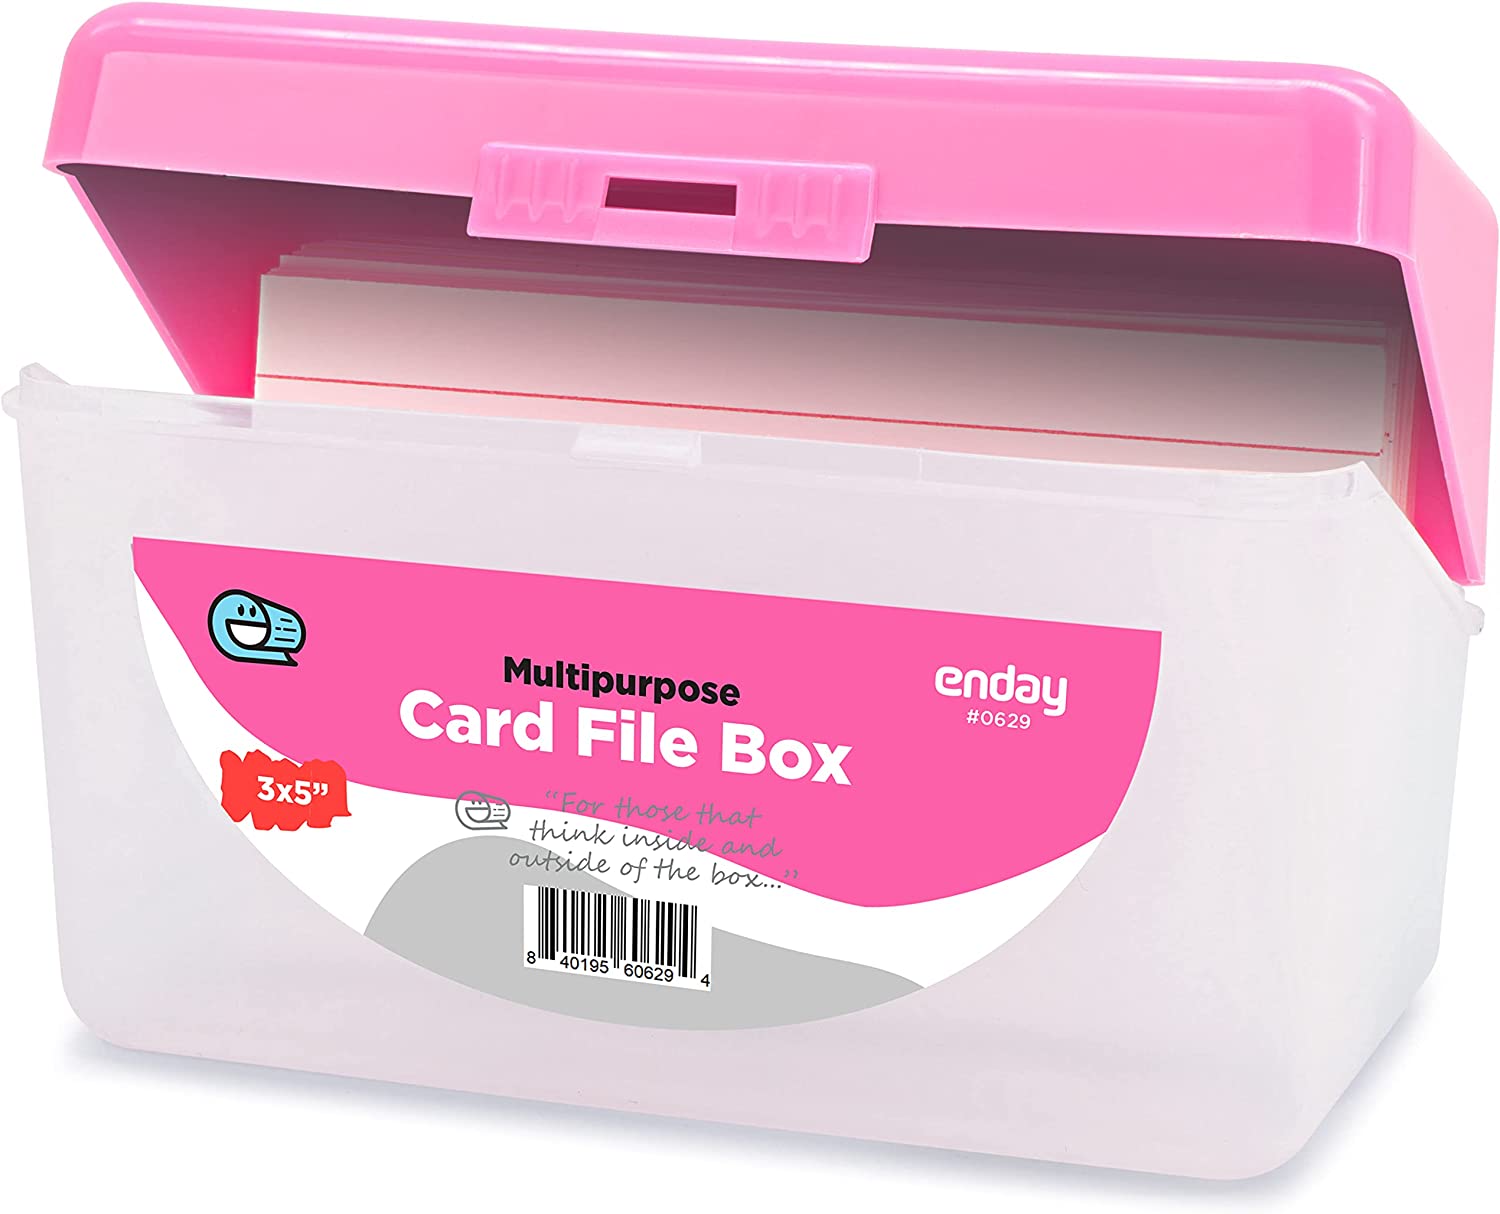 3x5 Index Card Holder With 5 Dividers, Labels (3 Colors, 3 Pack)